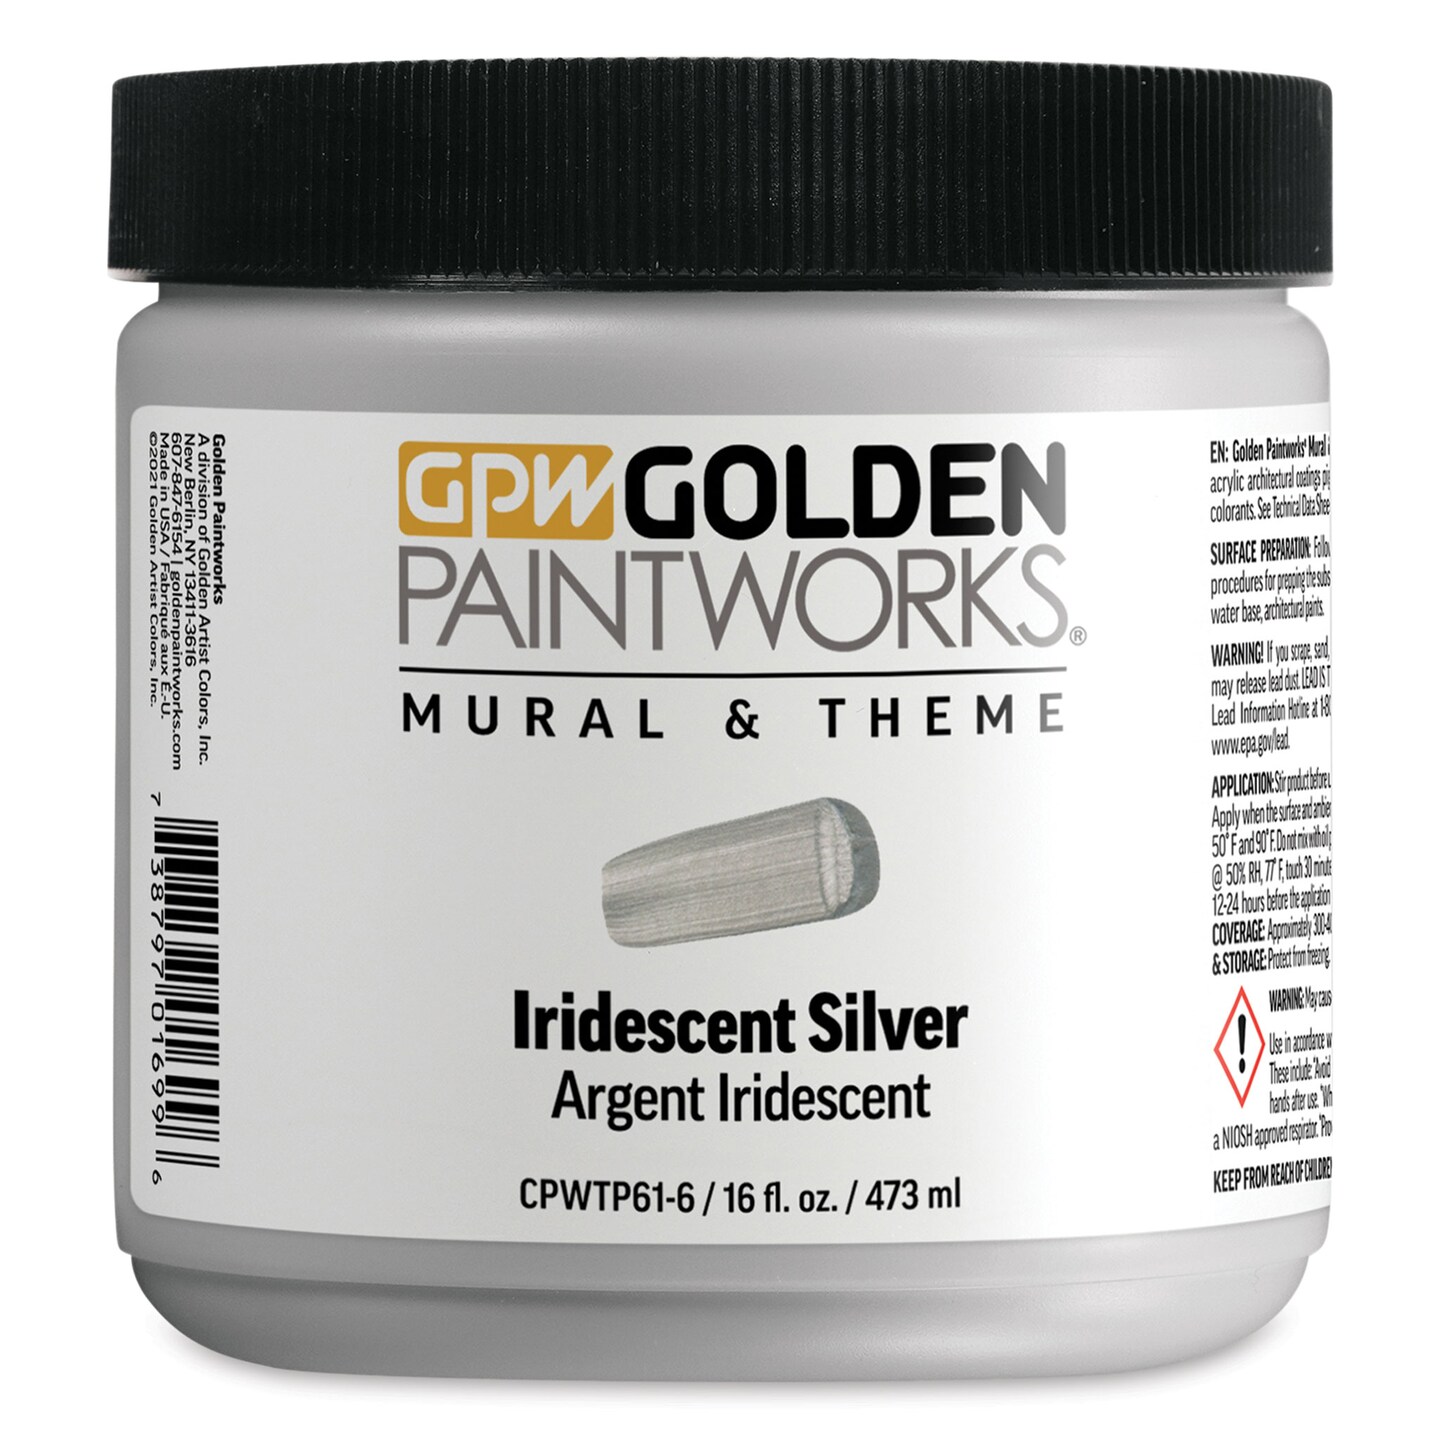 Golden Paintworks Mural and Theme Acrylic Paint - Iridescent Silver, 16 oz, Jar